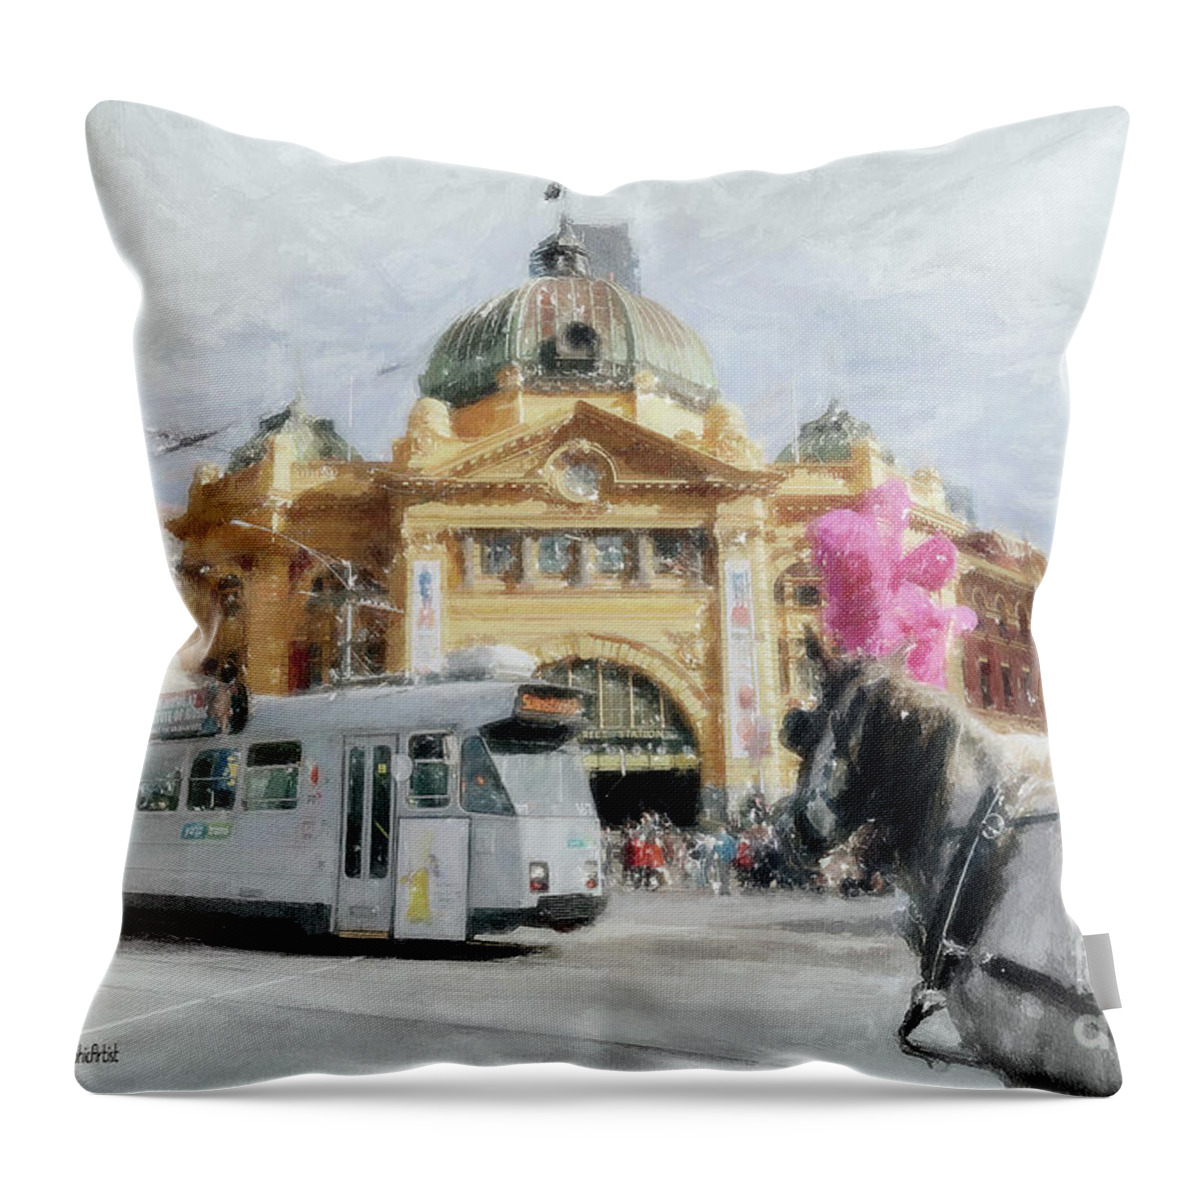 Flinders Street Throw Pillow featuring the painting Flinders Street Station, Melbourne by Chris Armytage